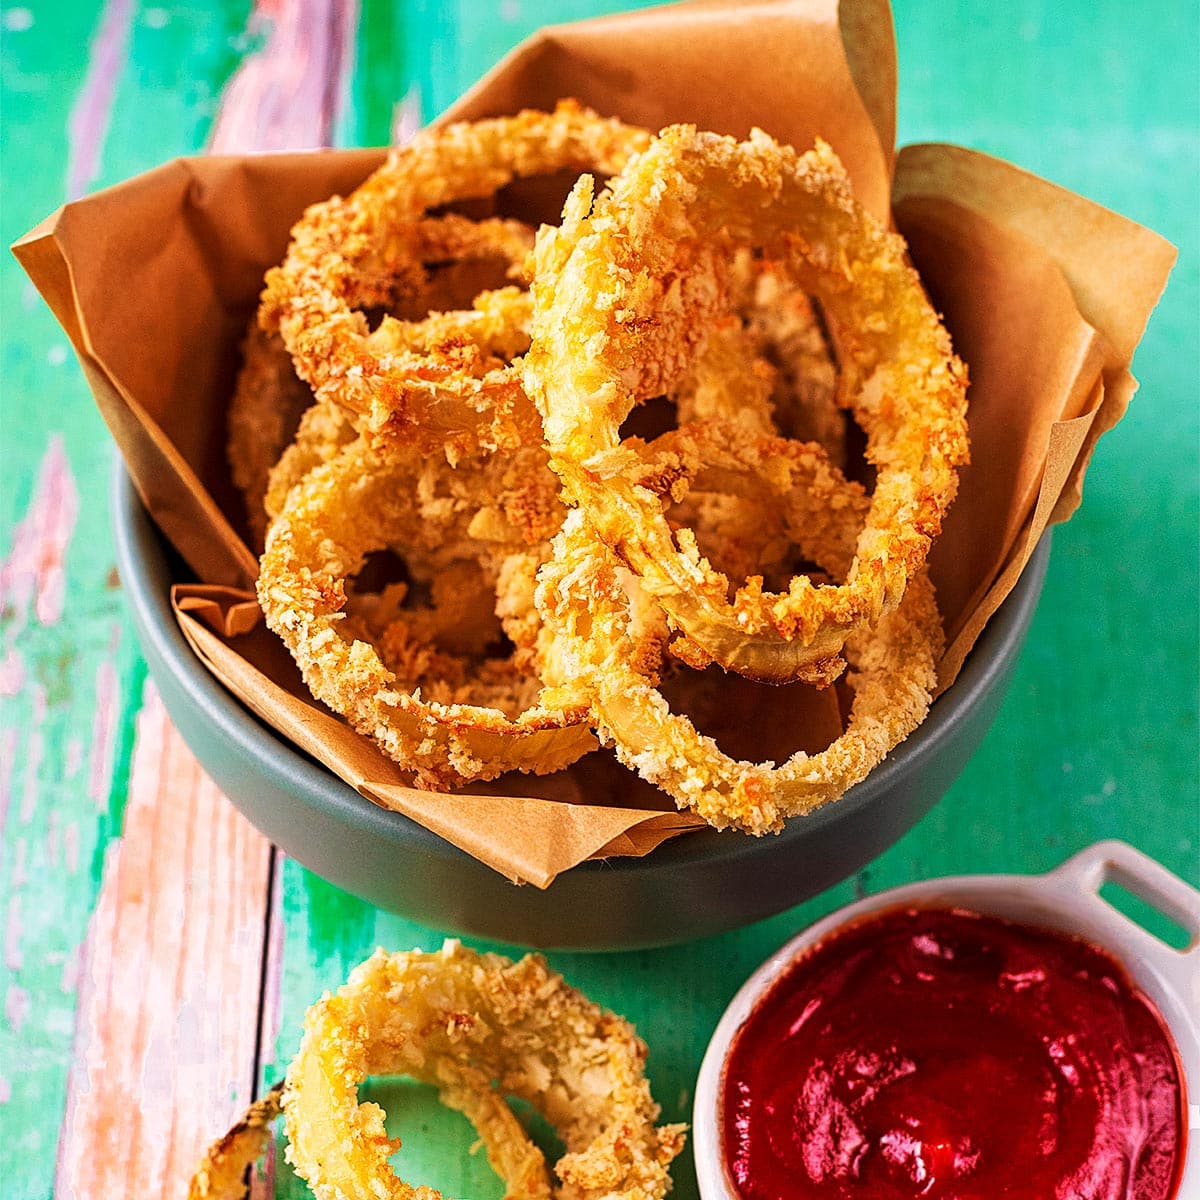 Oven Baked Onion Rings - Gluten-free and Dairy Free